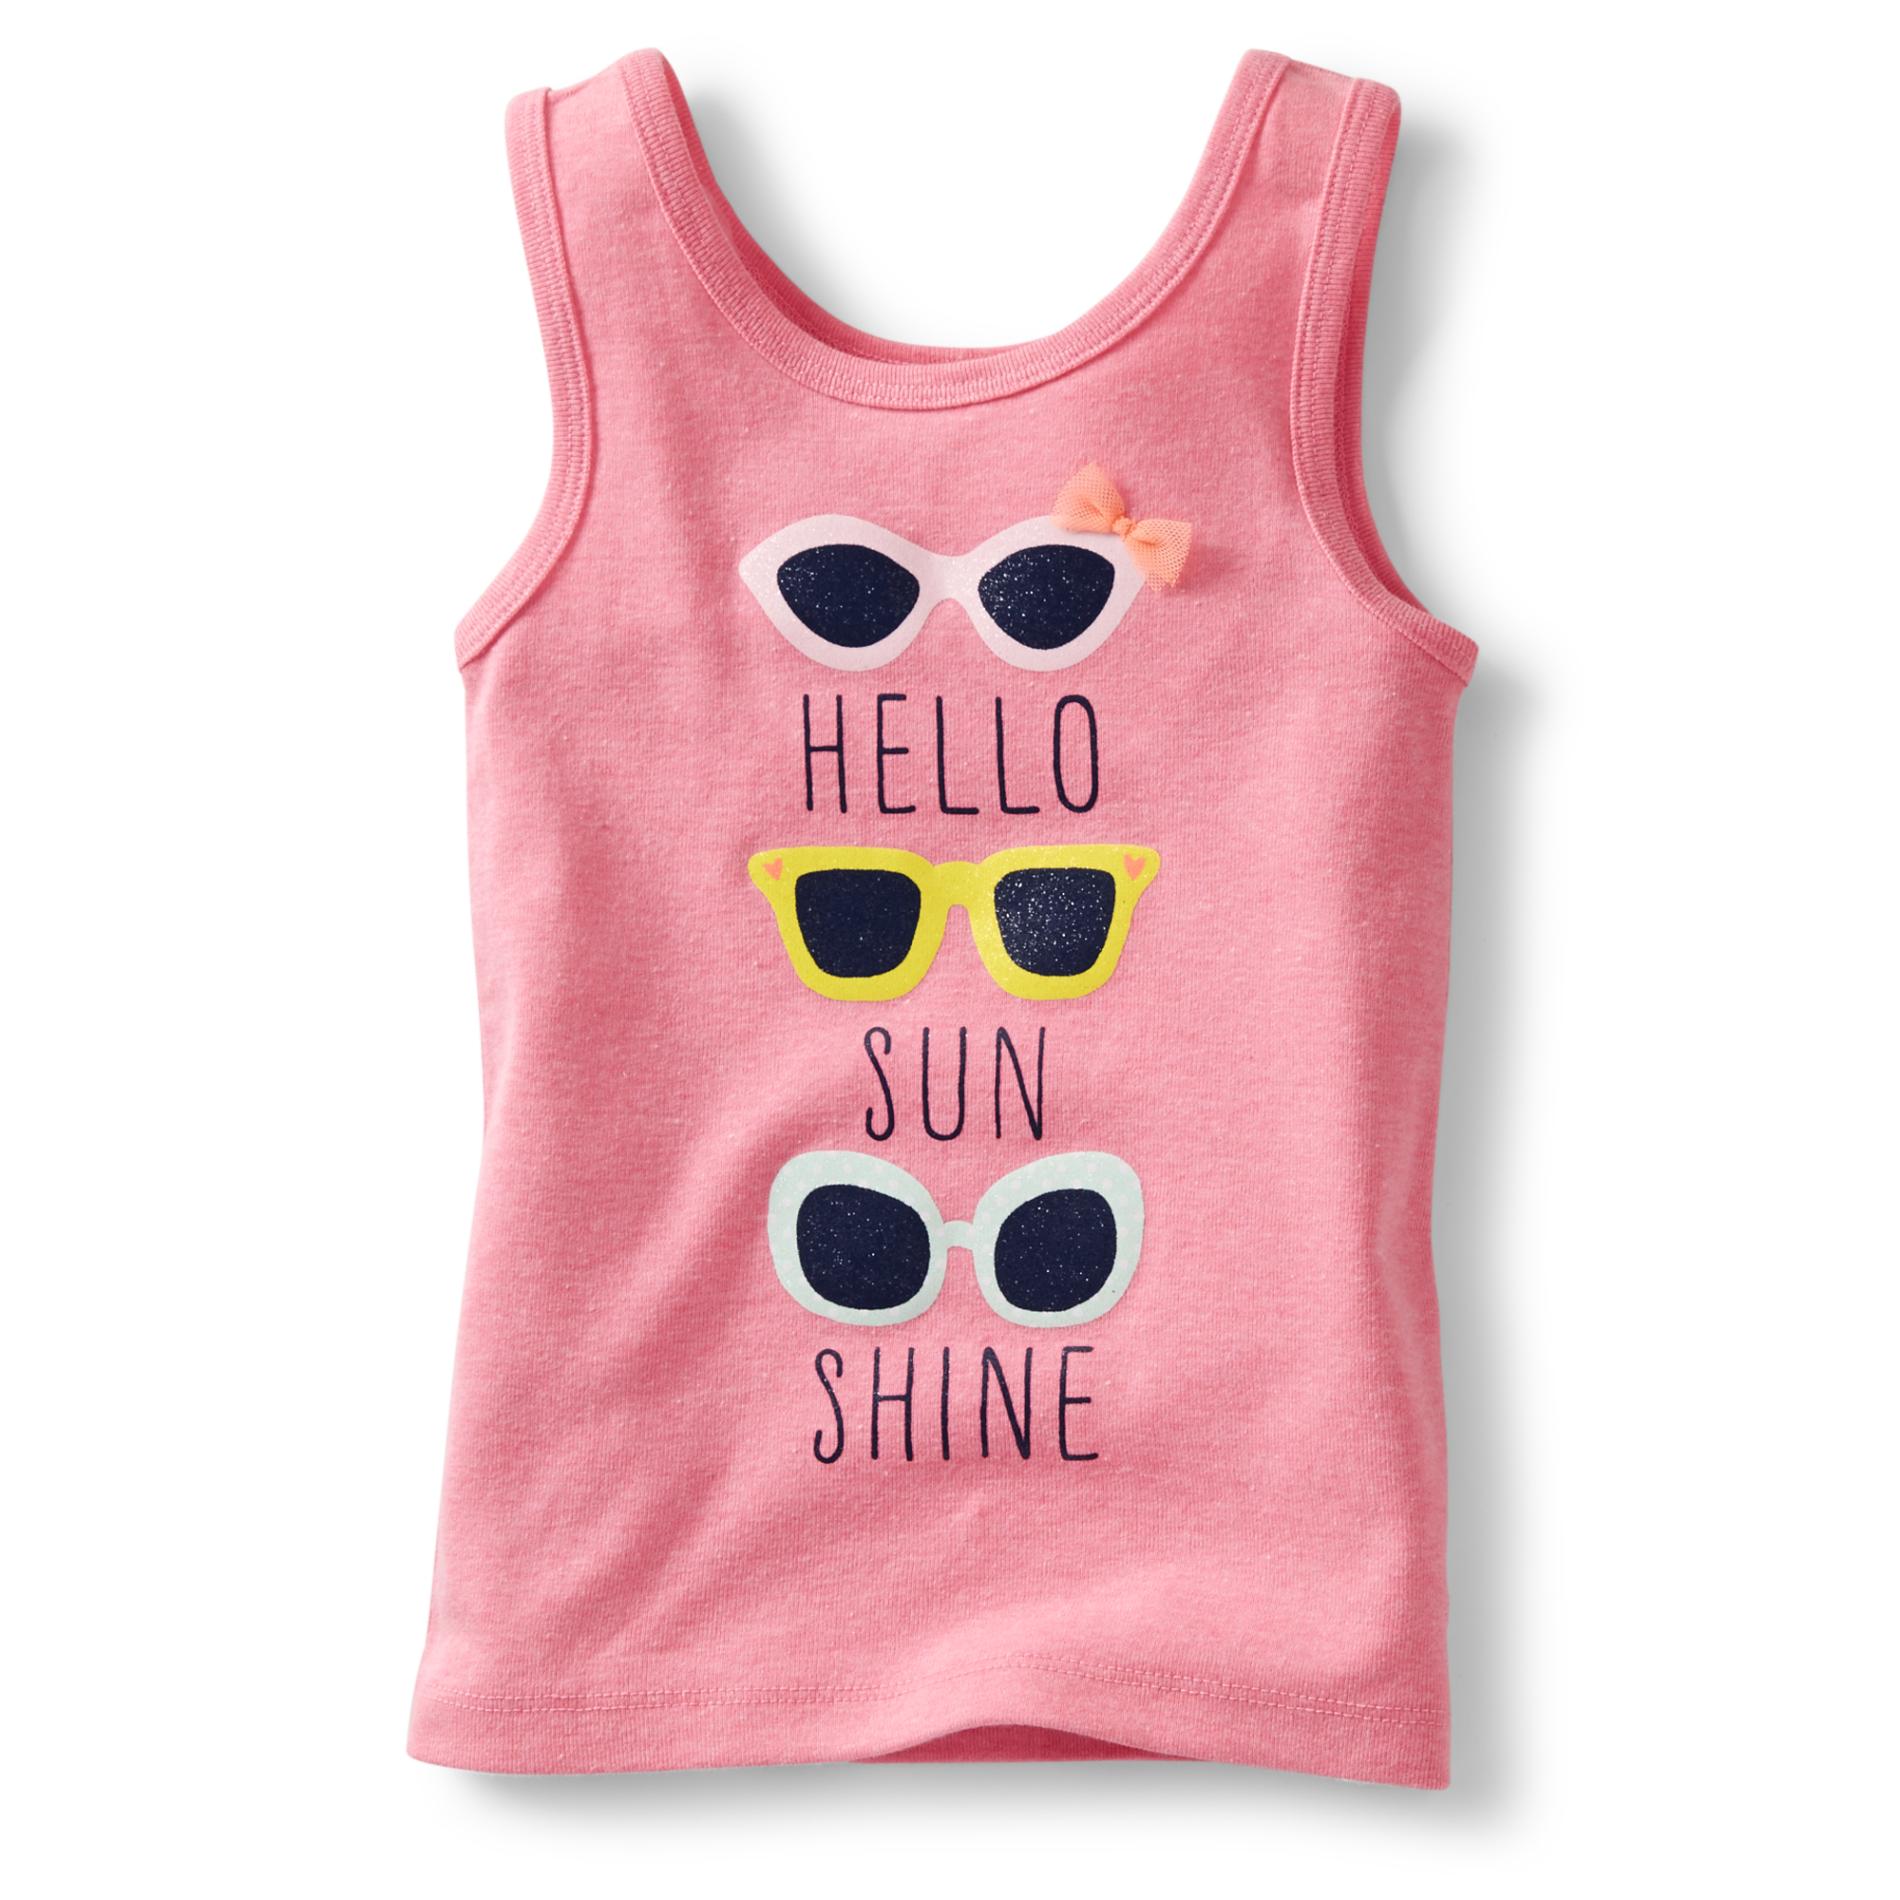 Carter's Girl's Graphic Tank Top - Sunglasses